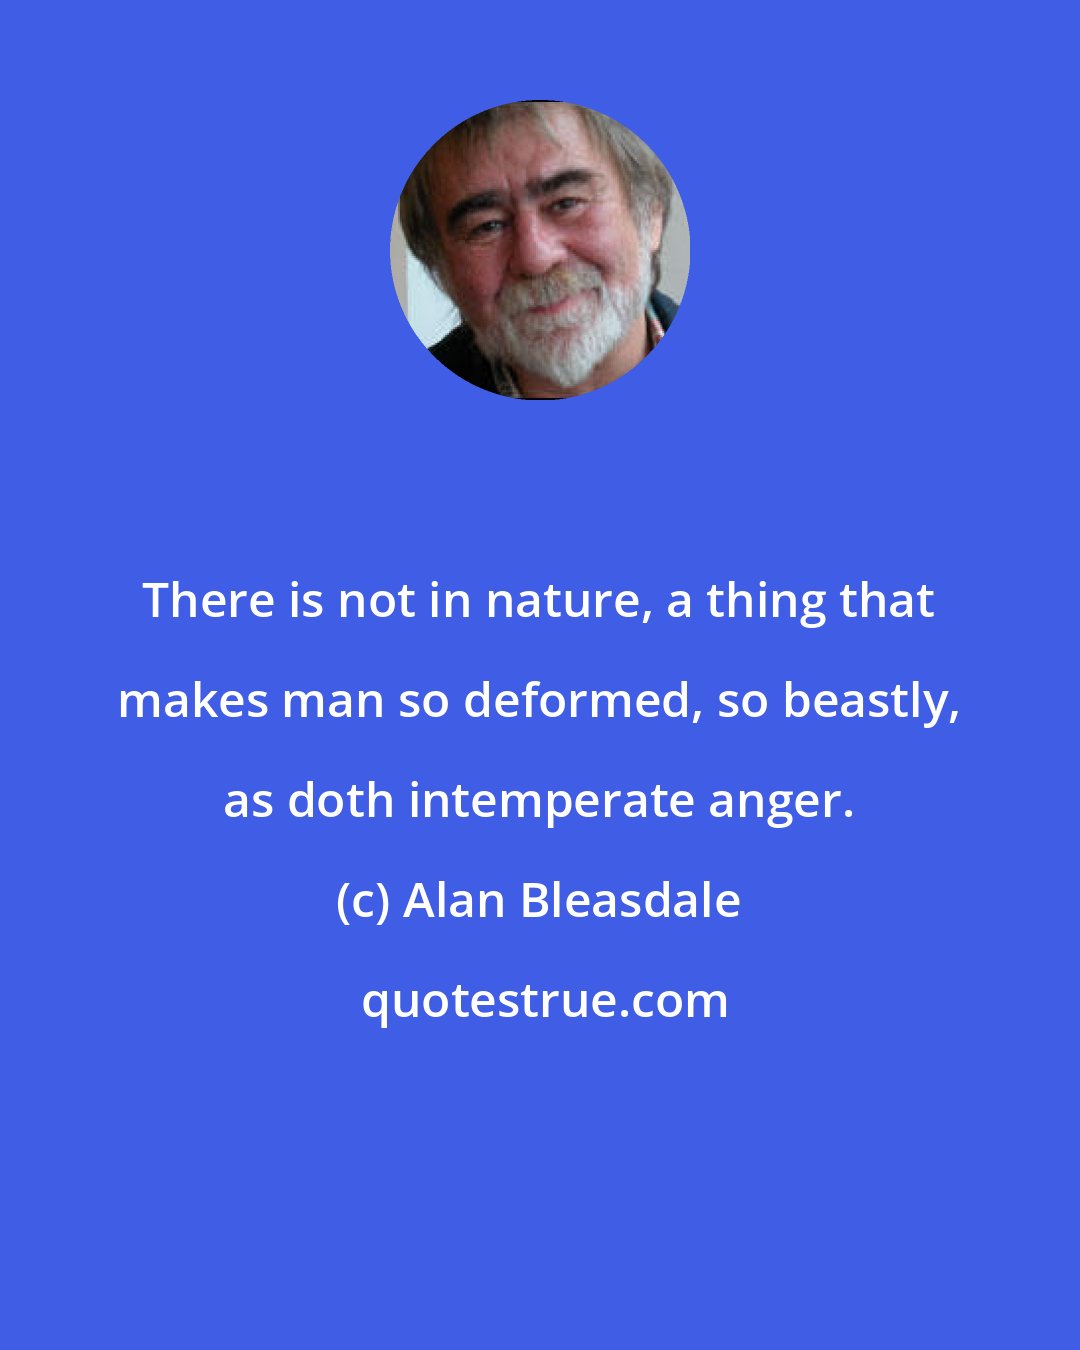 Alan Bleasdale: There is not in nature, a thing that makes man so deformed, so beastly, as doth intemperate anger.